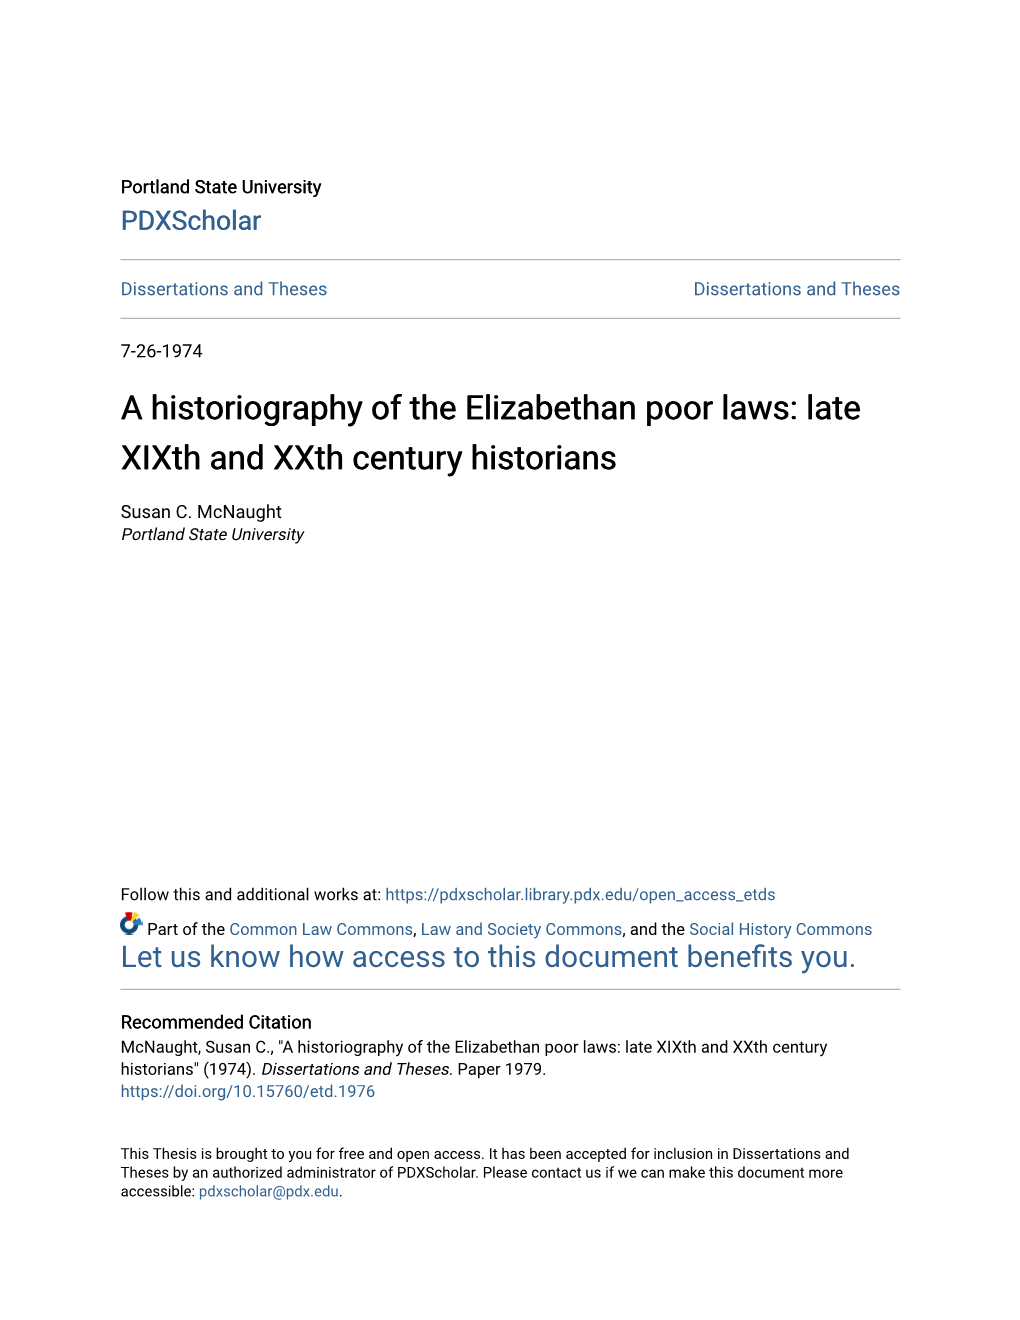 A Historiography of the Elizabethan Poor Laws: Late Xixth and Xxth Century Historians